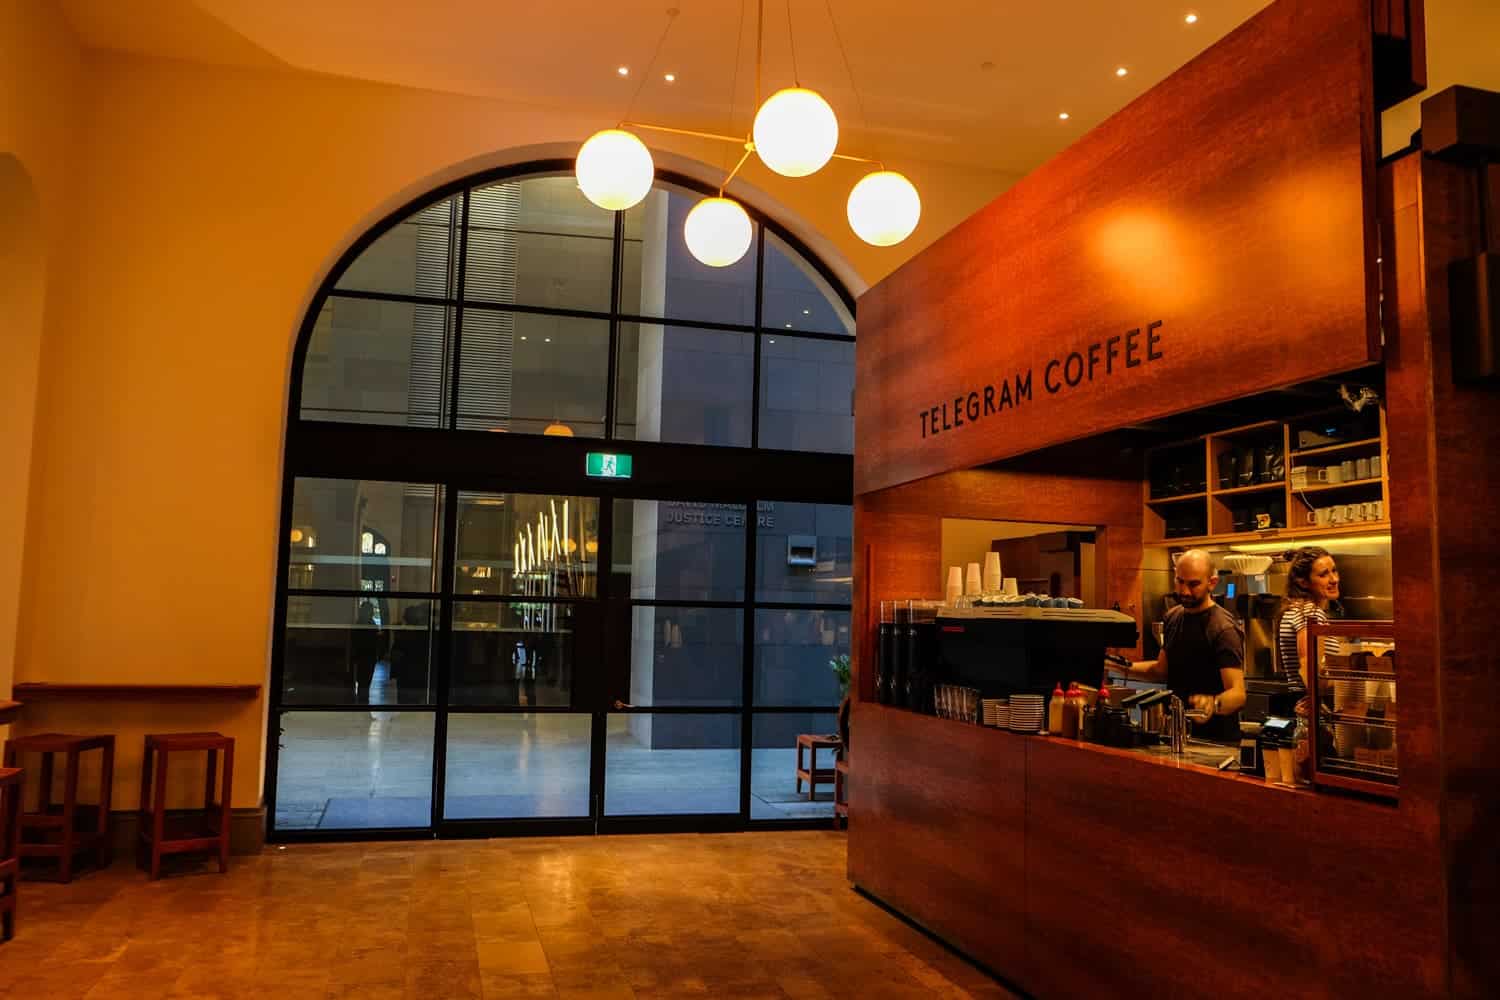 The small Telegram Coffee shop inside Perth's State Buildings